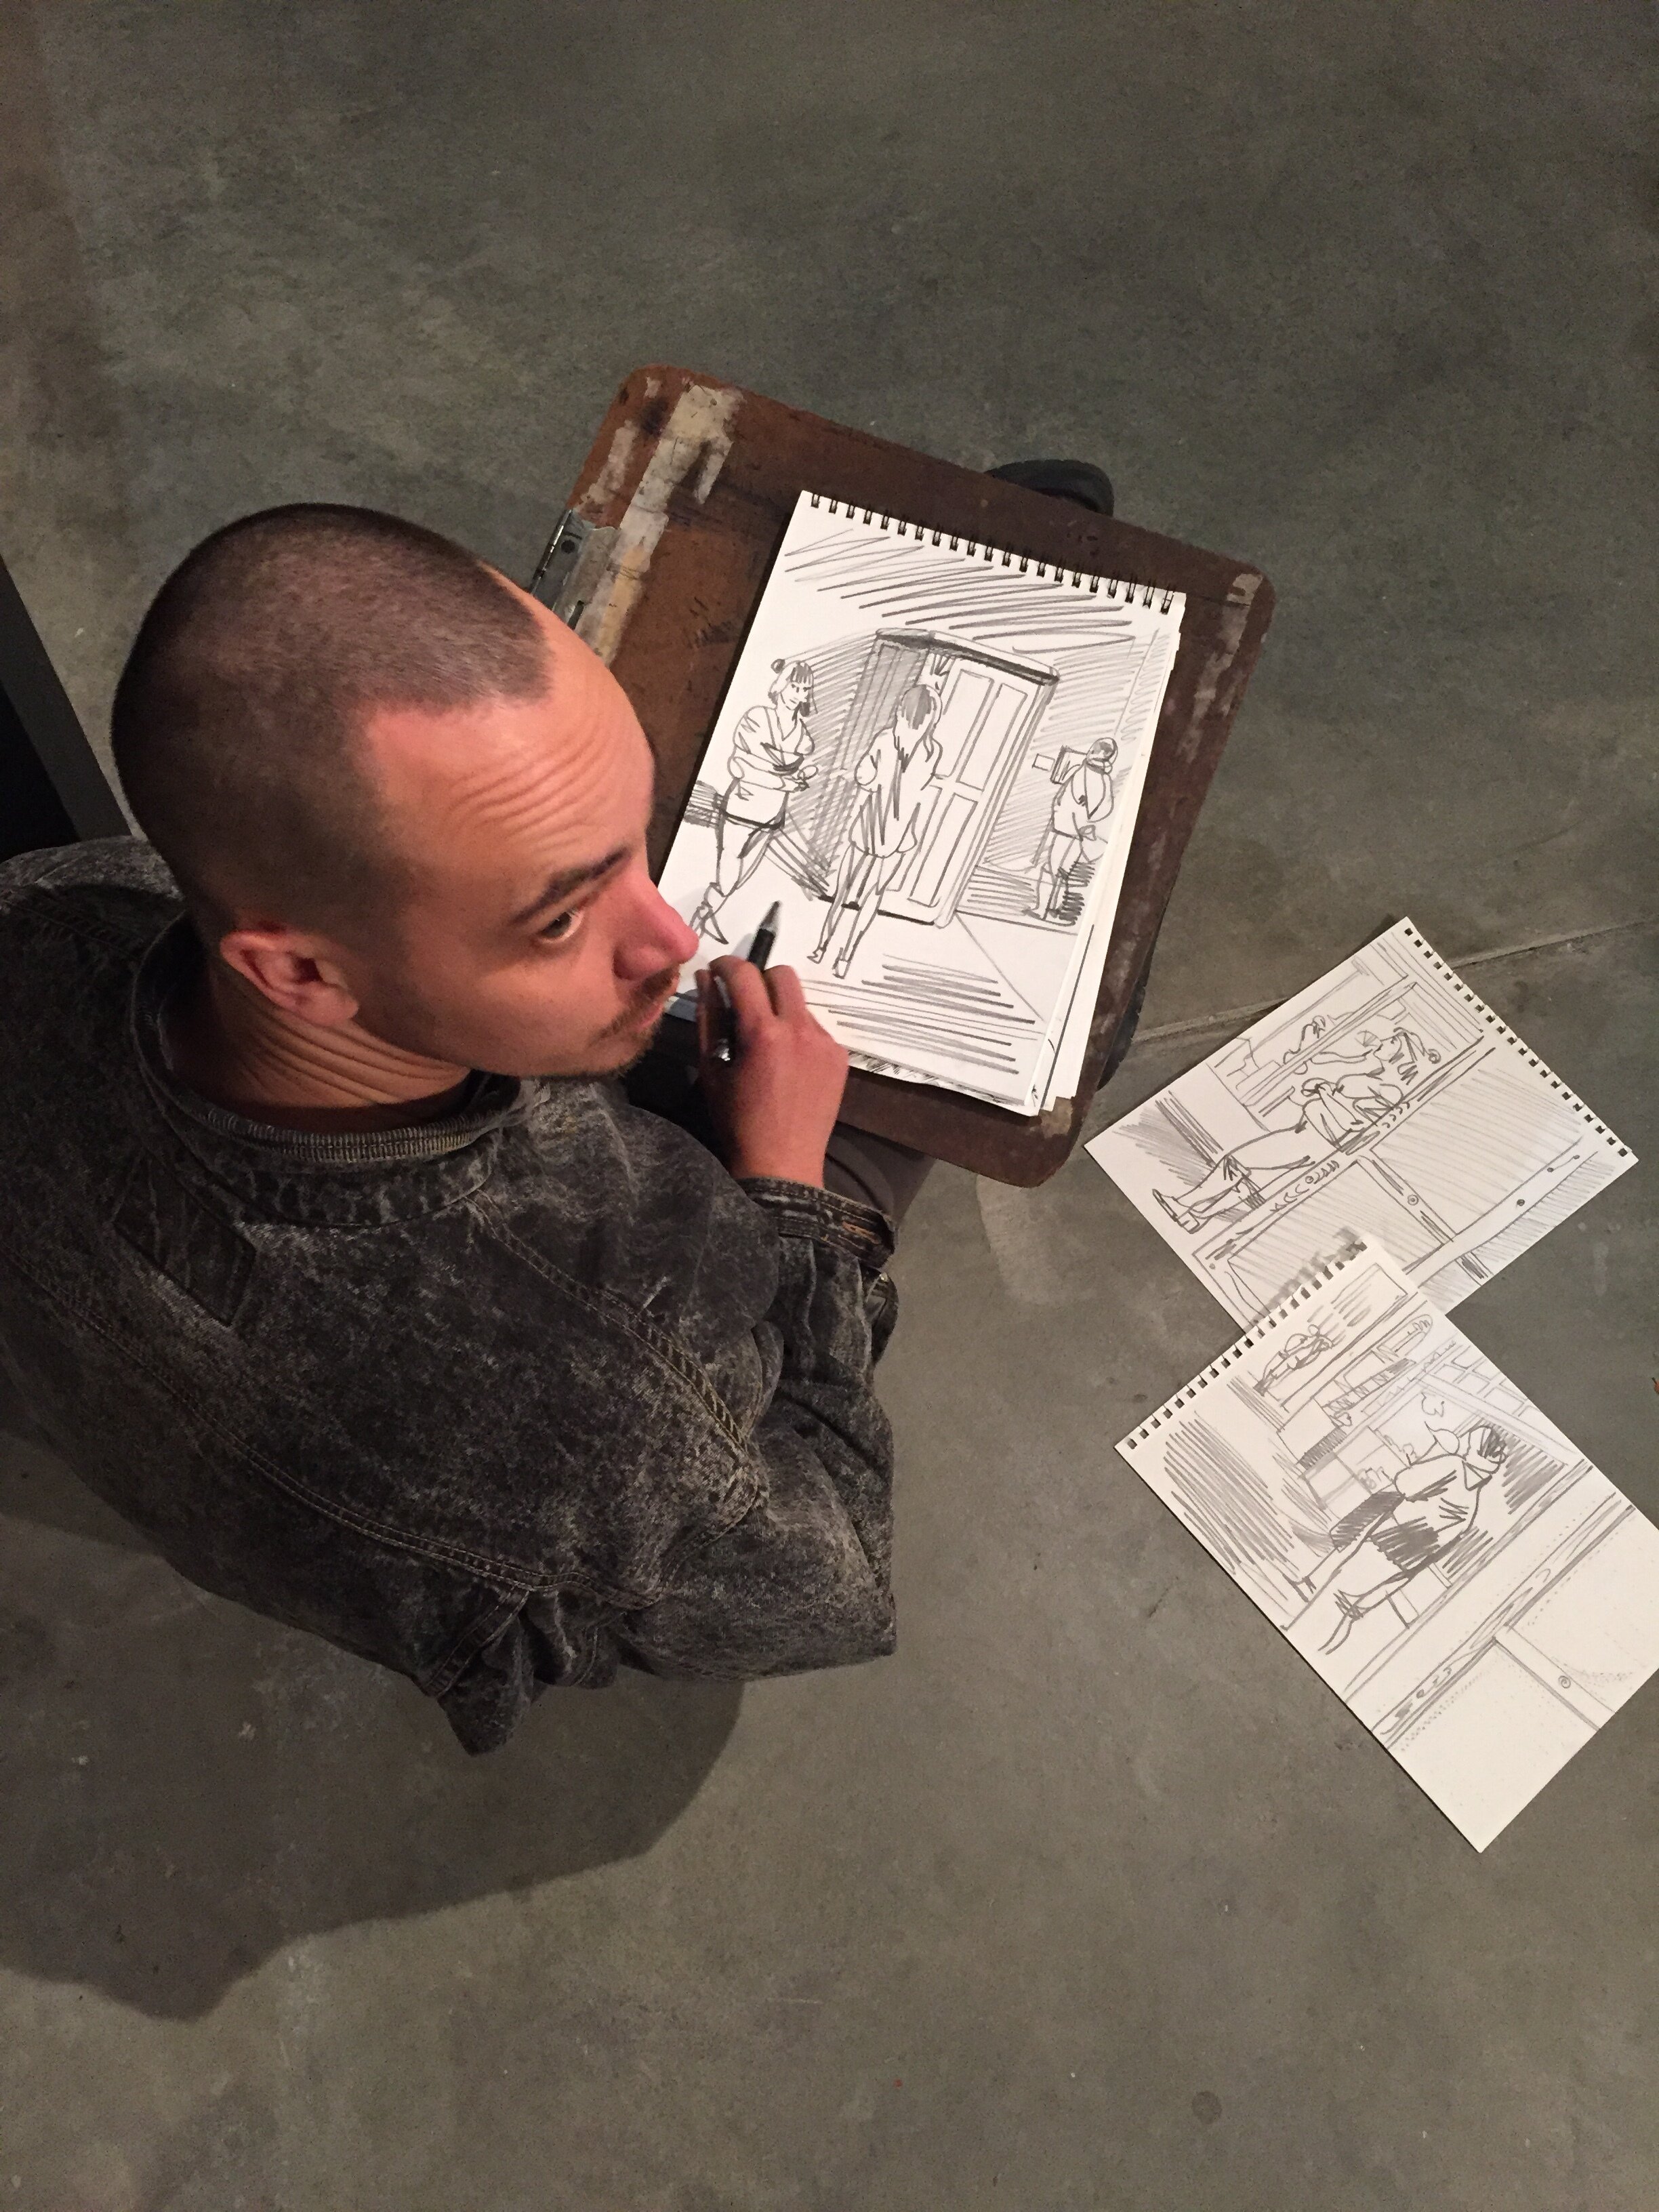 Miles Drawing Lucas Murgida's Performance Art as a part of the performance.JPG